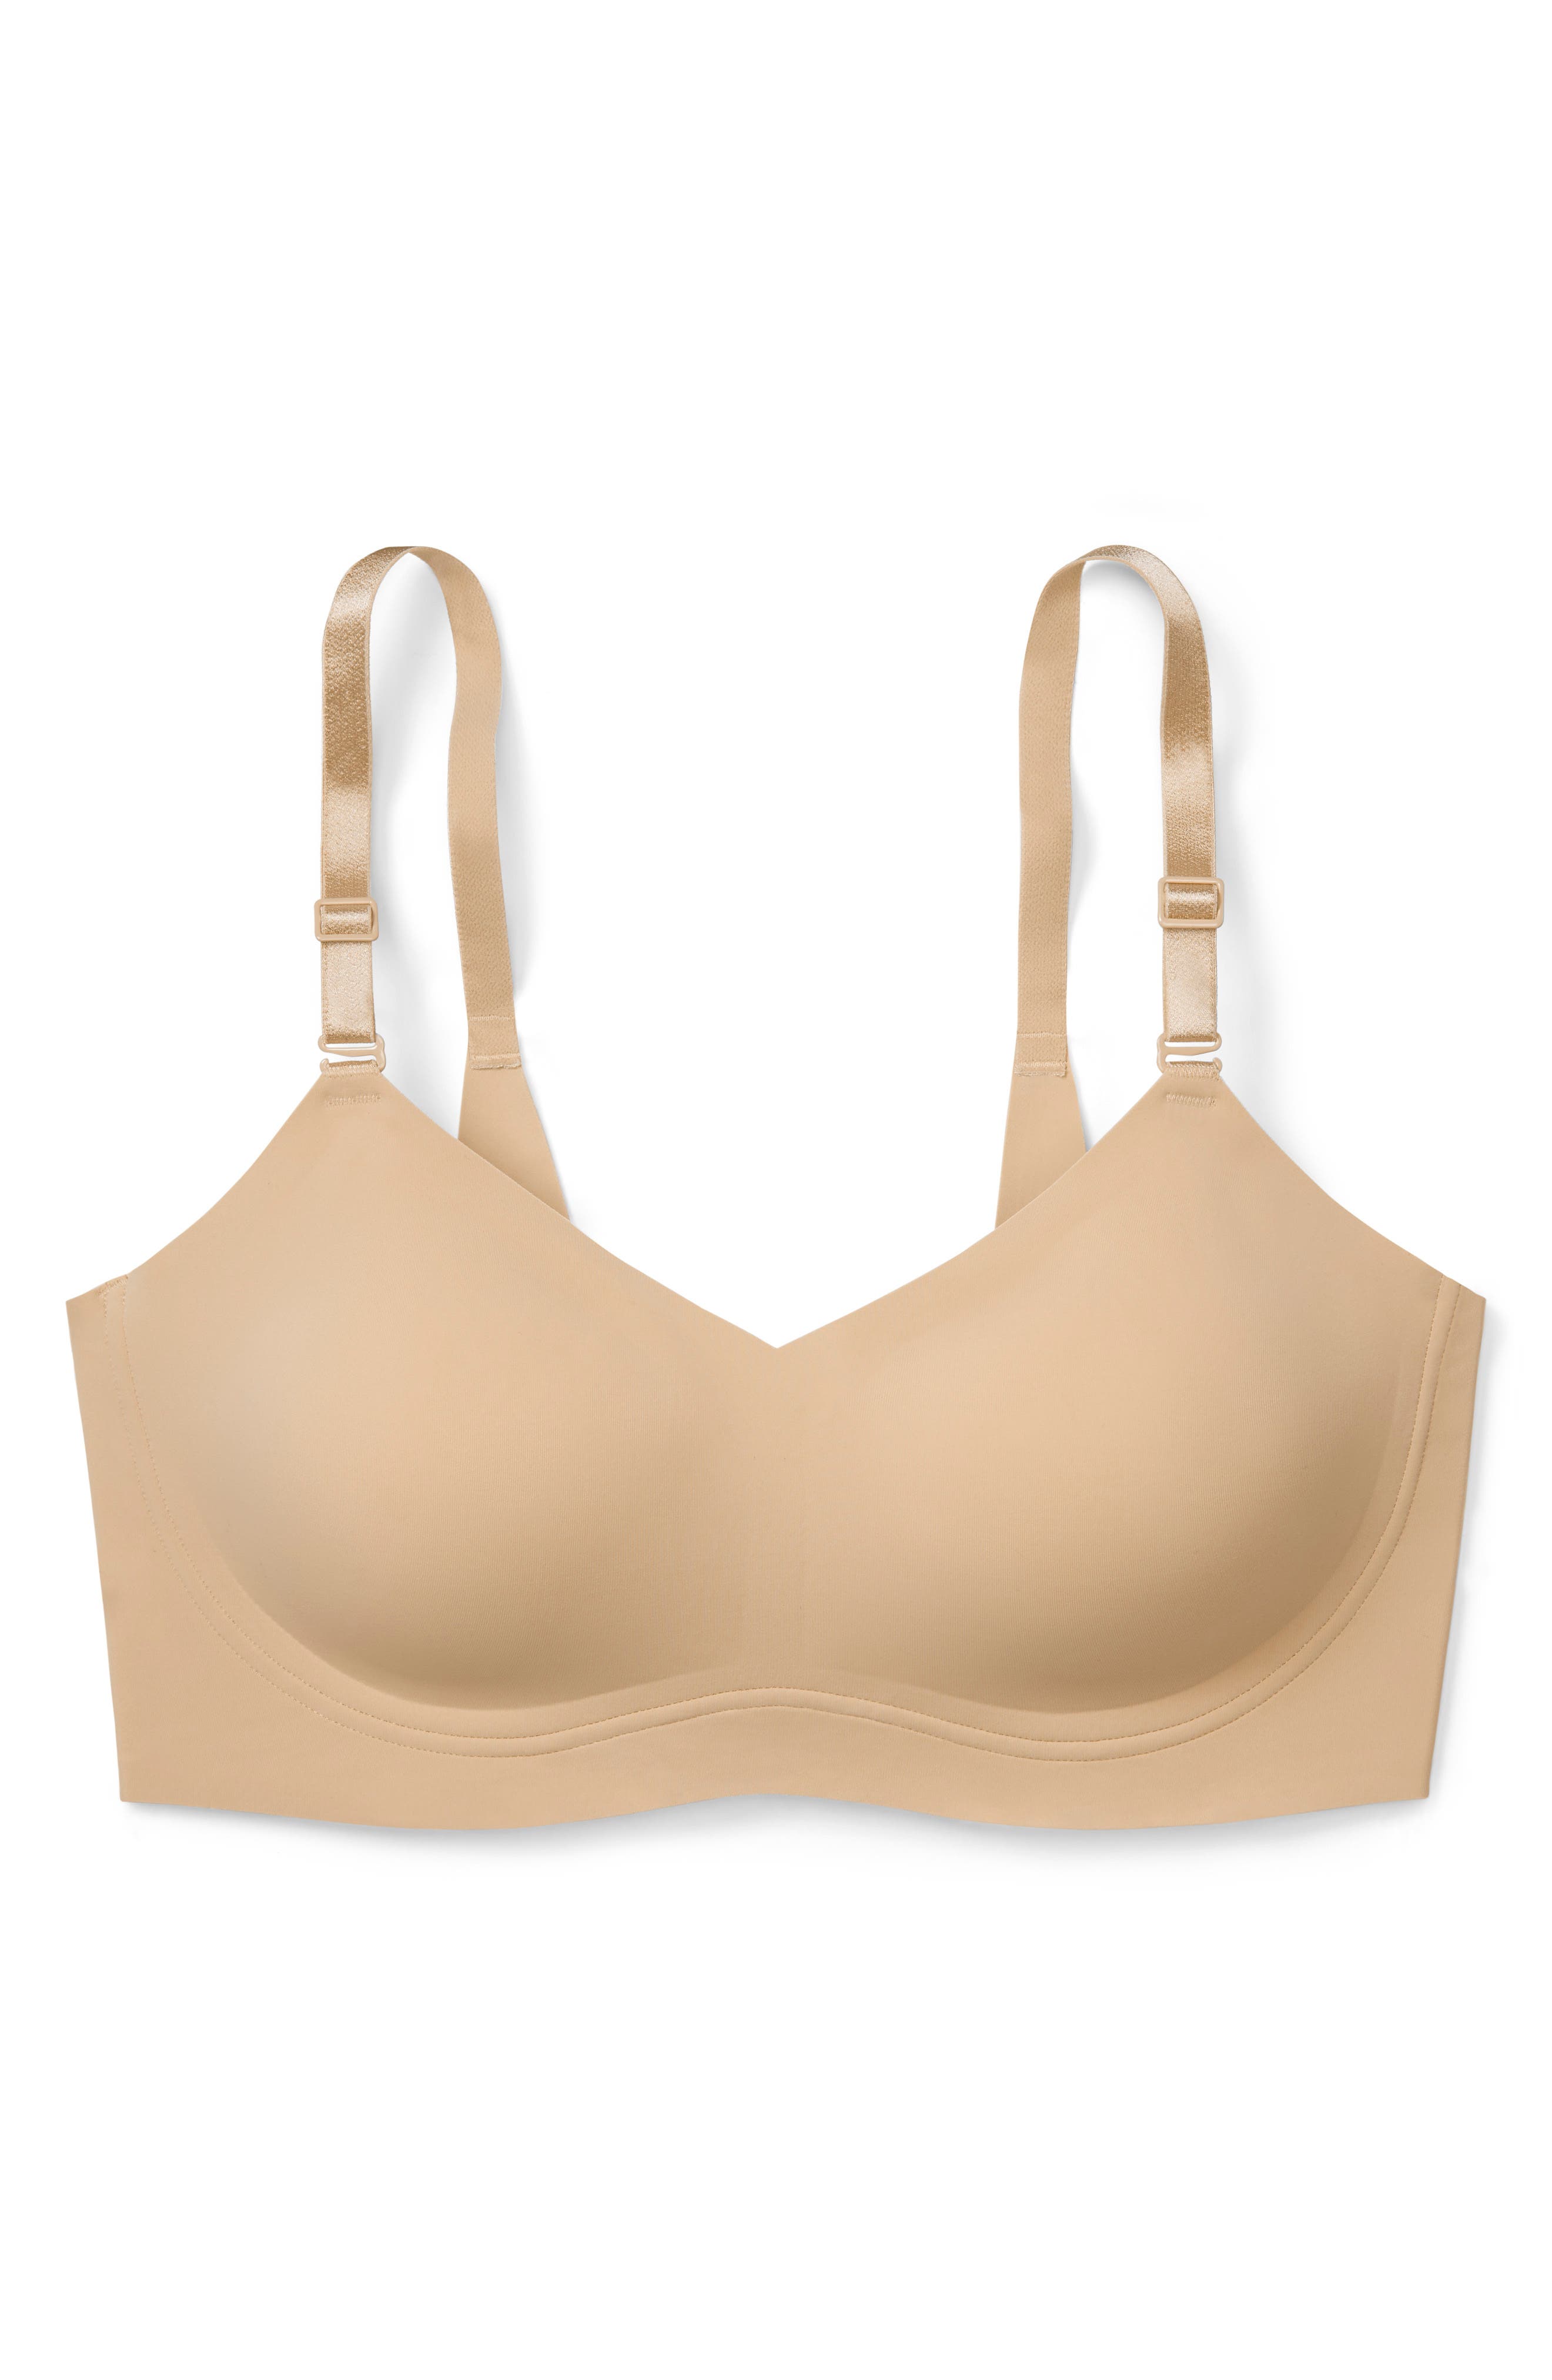 Buy True & Co Women's True Body Lift Scoop Bra with Soft Form Band, Desert,  X-Small at